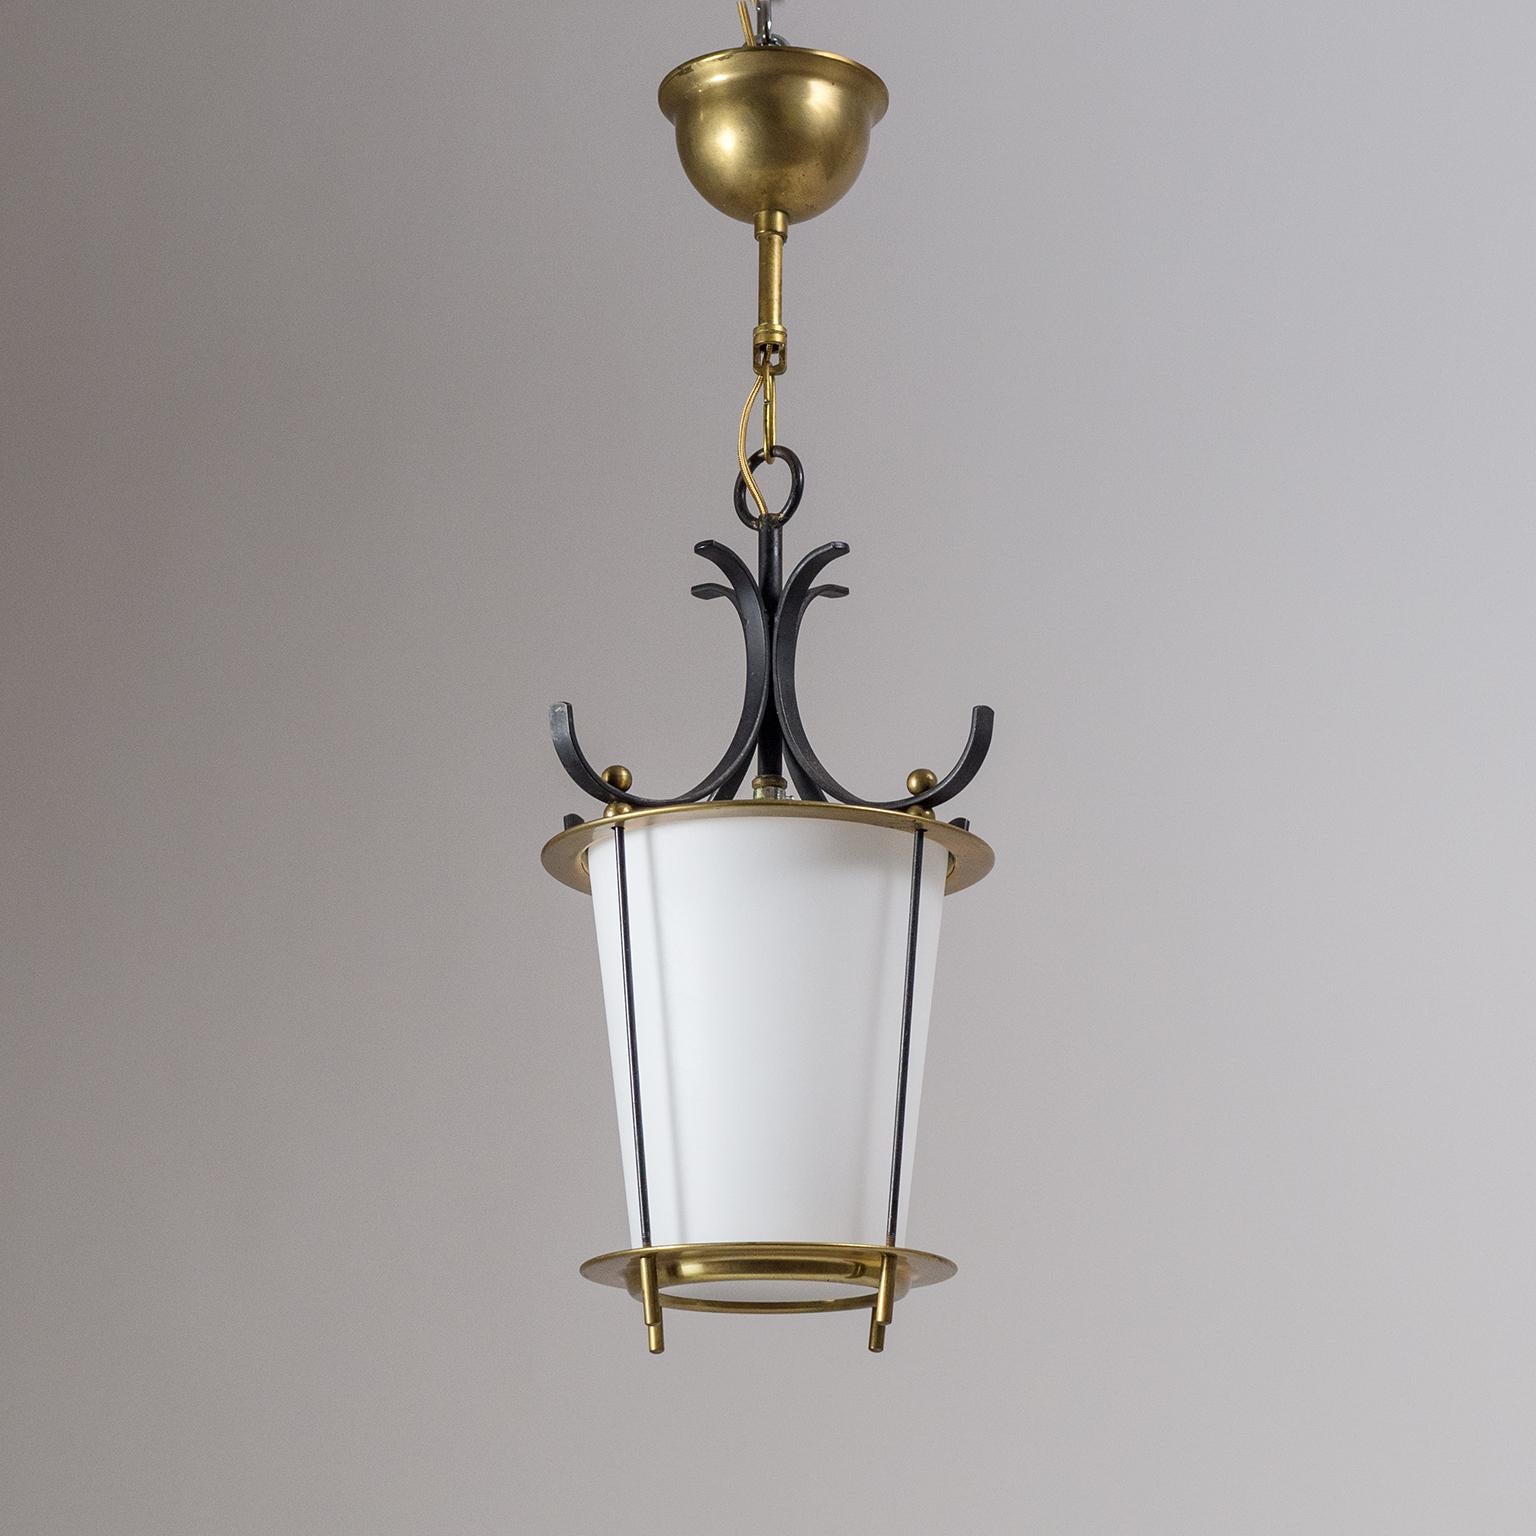 Charming midcentury lantern with a satin glass diffuser, brass hardware as well as black lacquered elements. Very nice original condition with a light patina on the brass and some minor loss of original paint. One original E14 socket with new wiring.